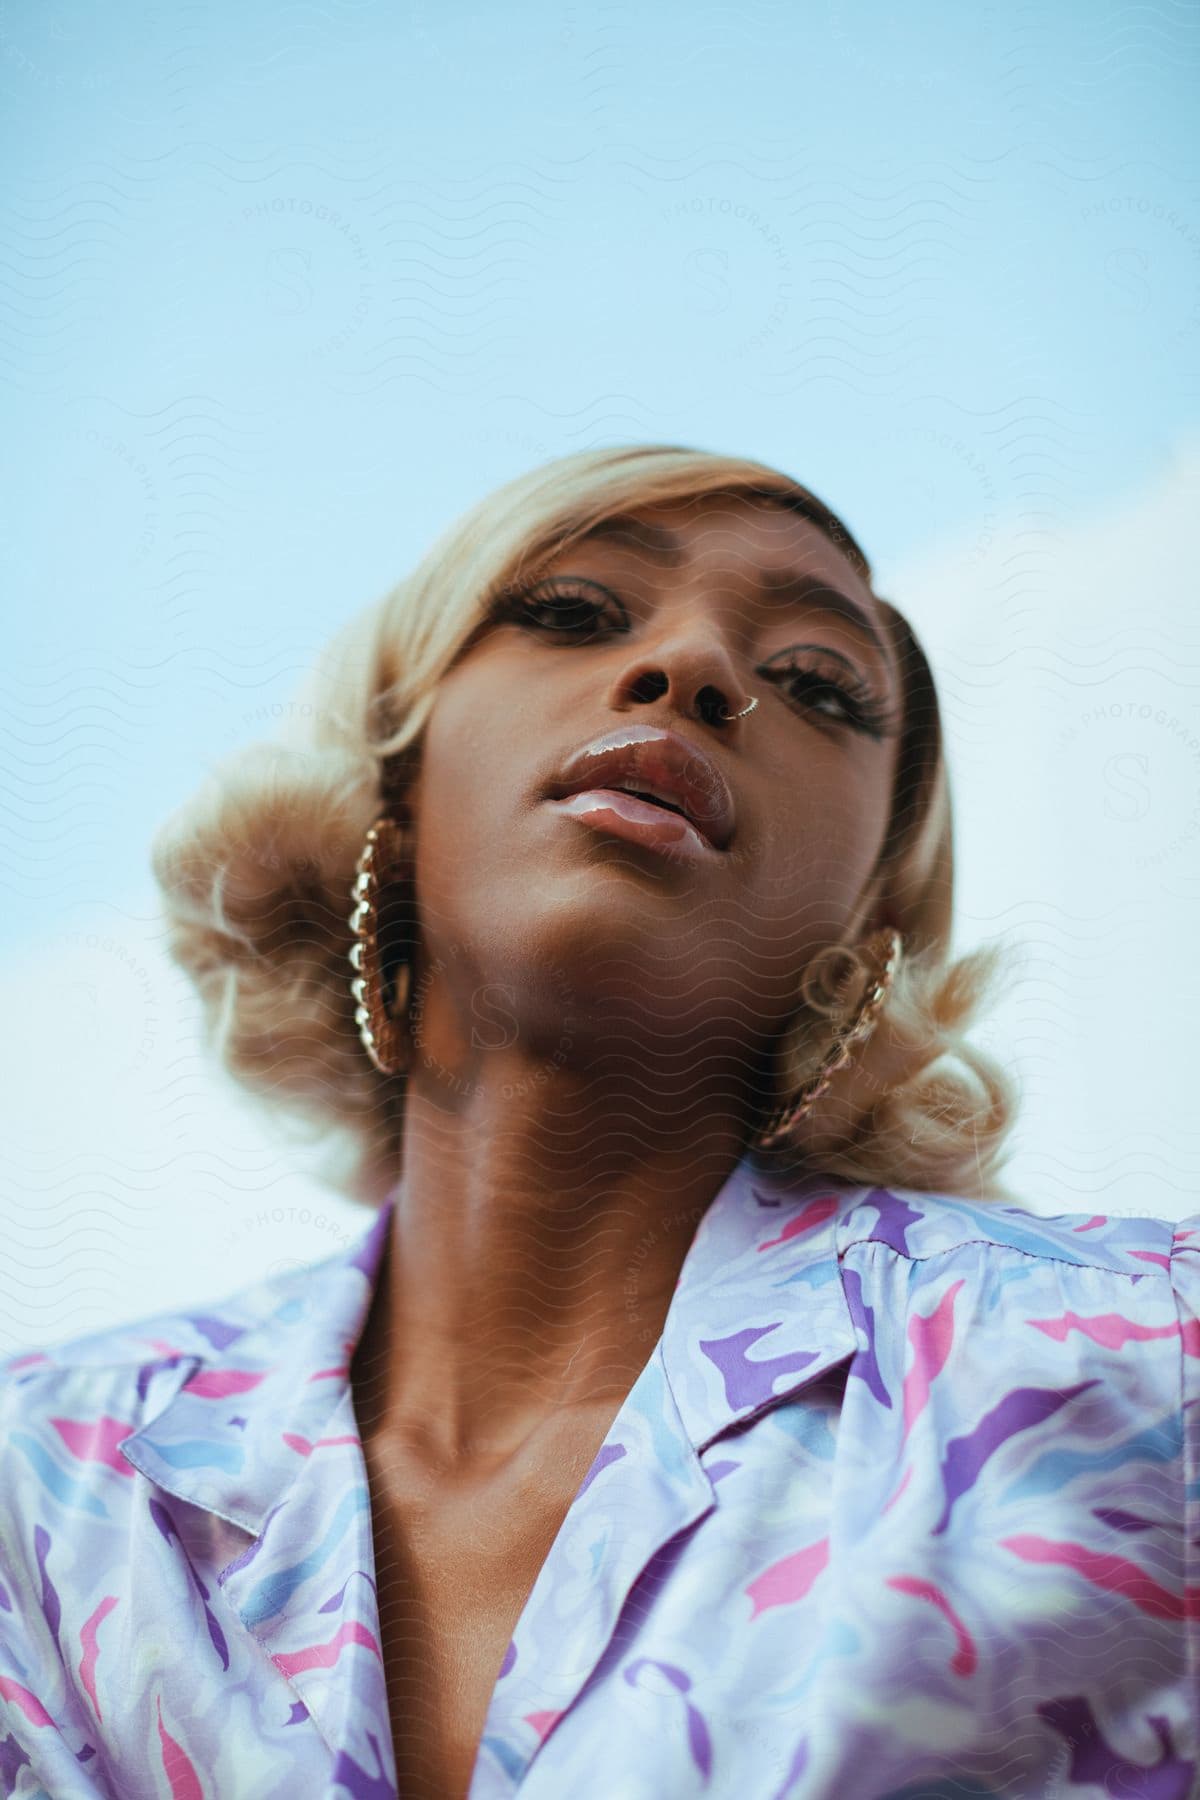 A confident black woman with blonde hair and earrings stares into the camera